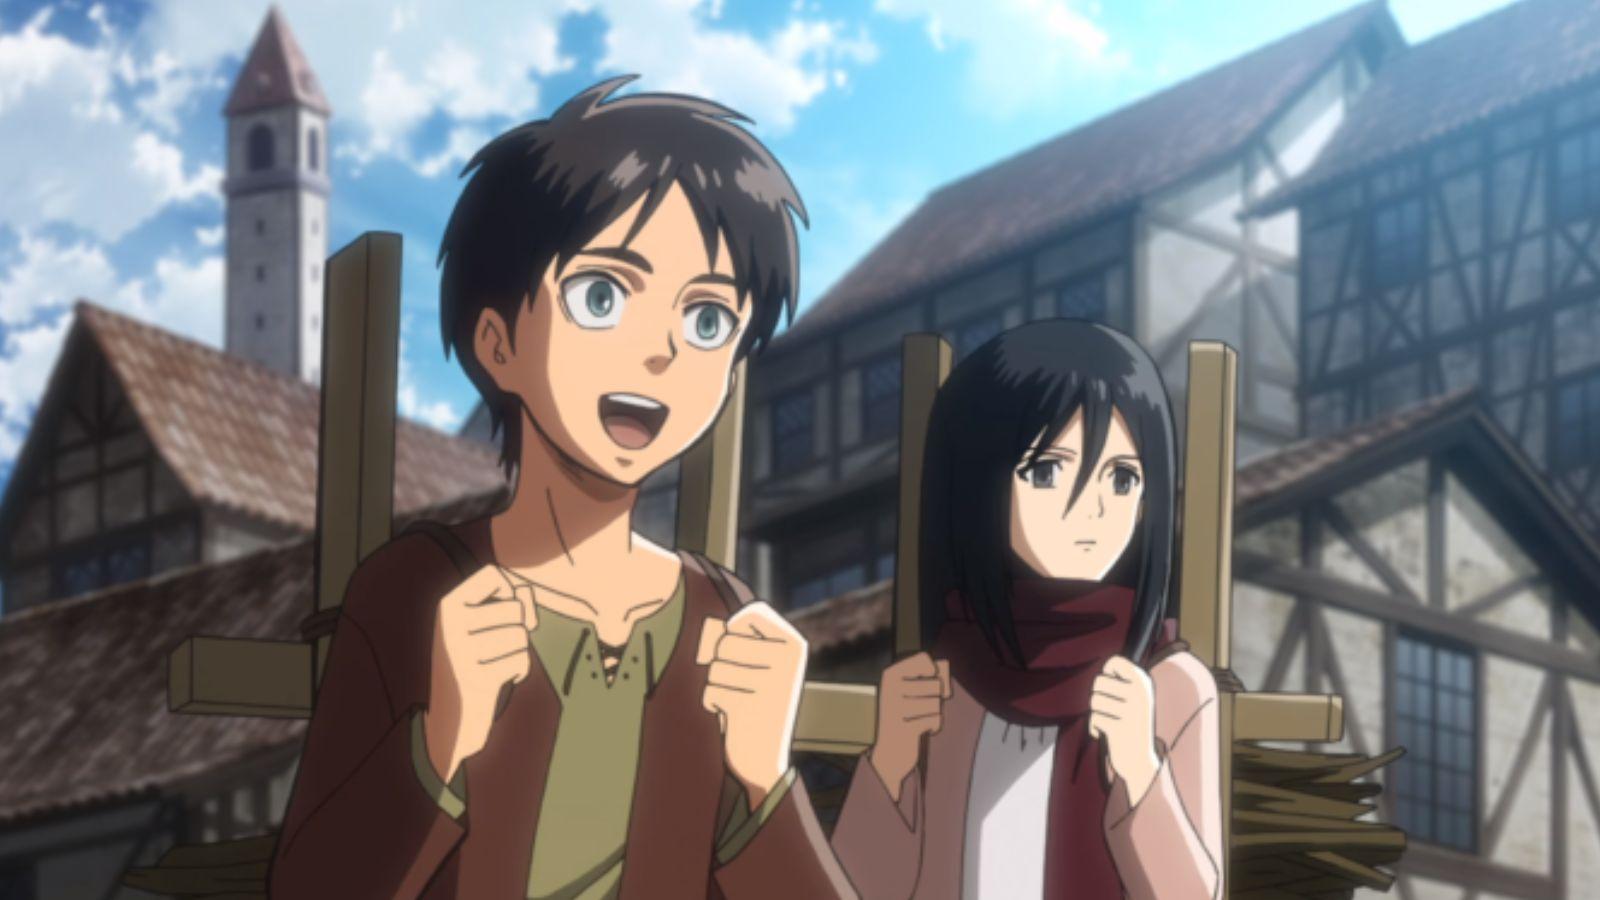 Eren and Mikasa from Attack on Titan